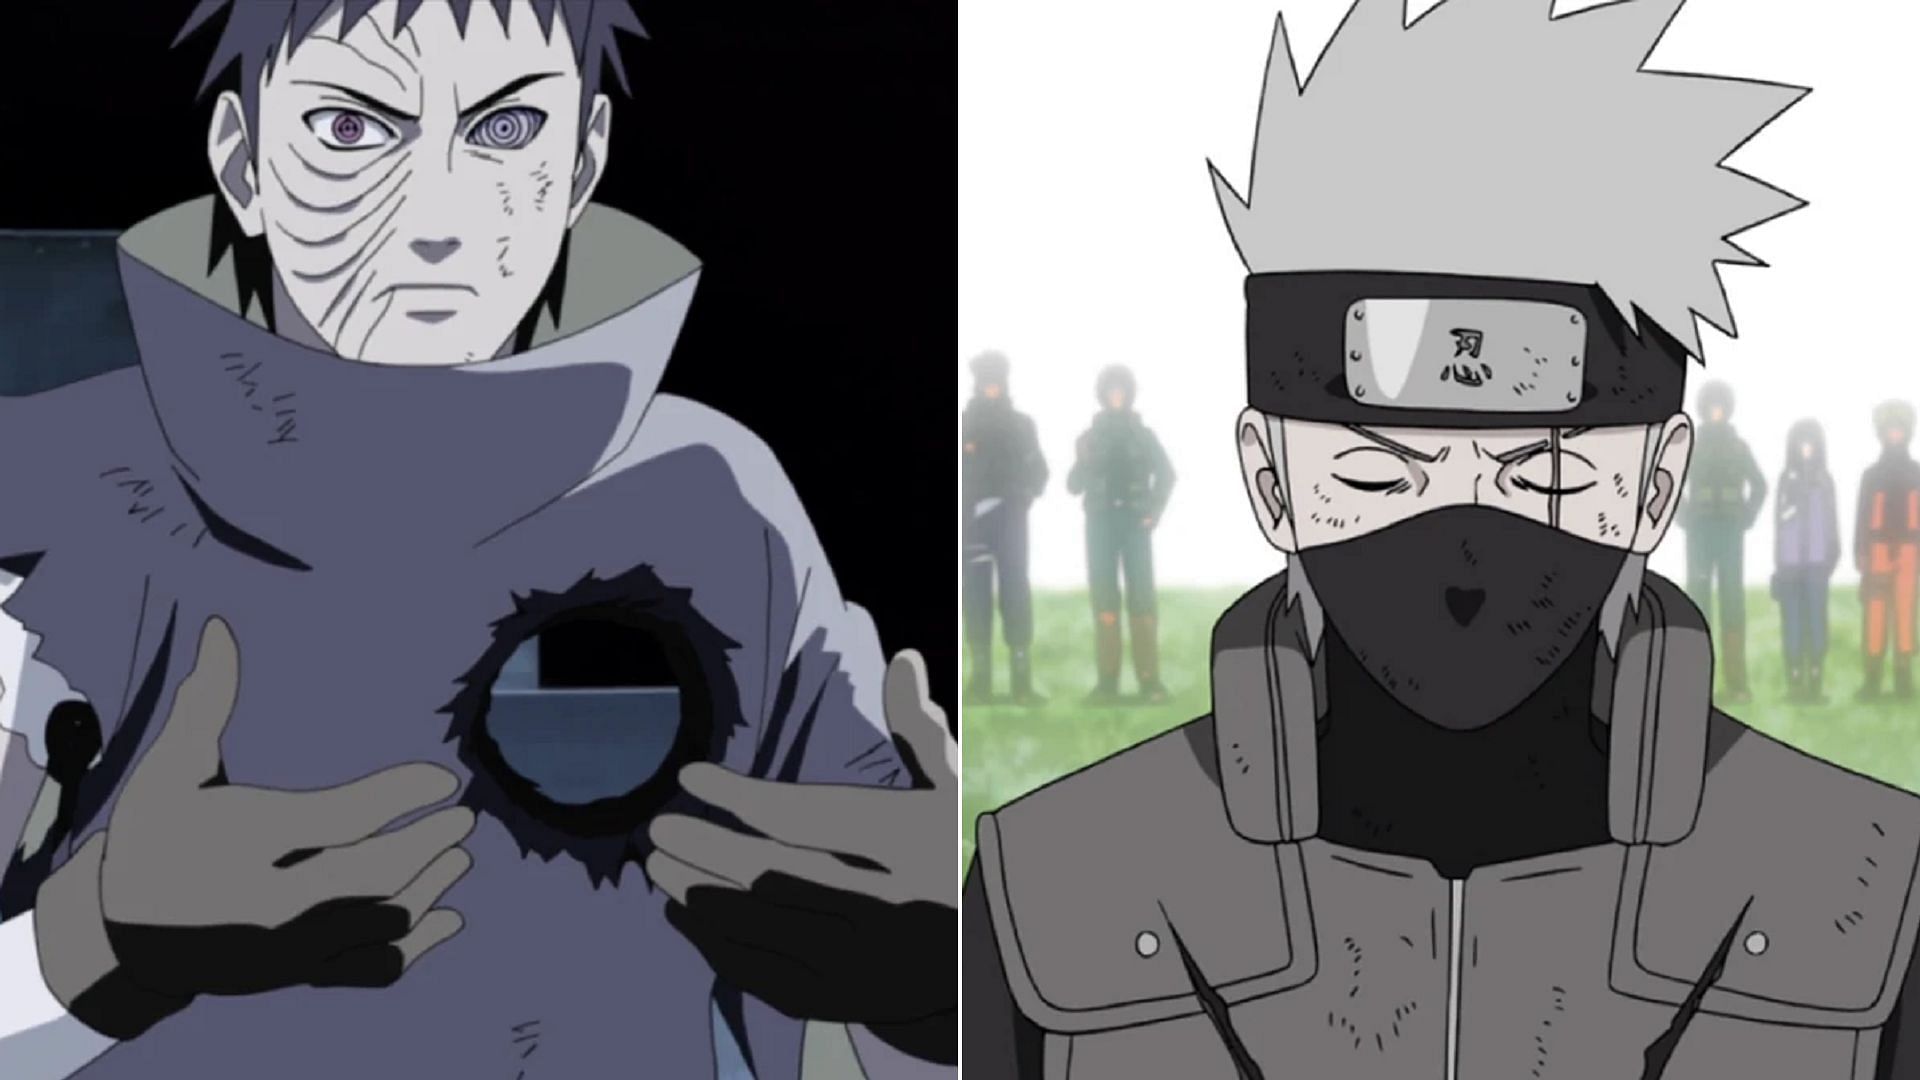 Anchoring himself to his loved ones, Kakashi didn&#039;t end like Obito (Image via Studio Pierrot, Naruto)